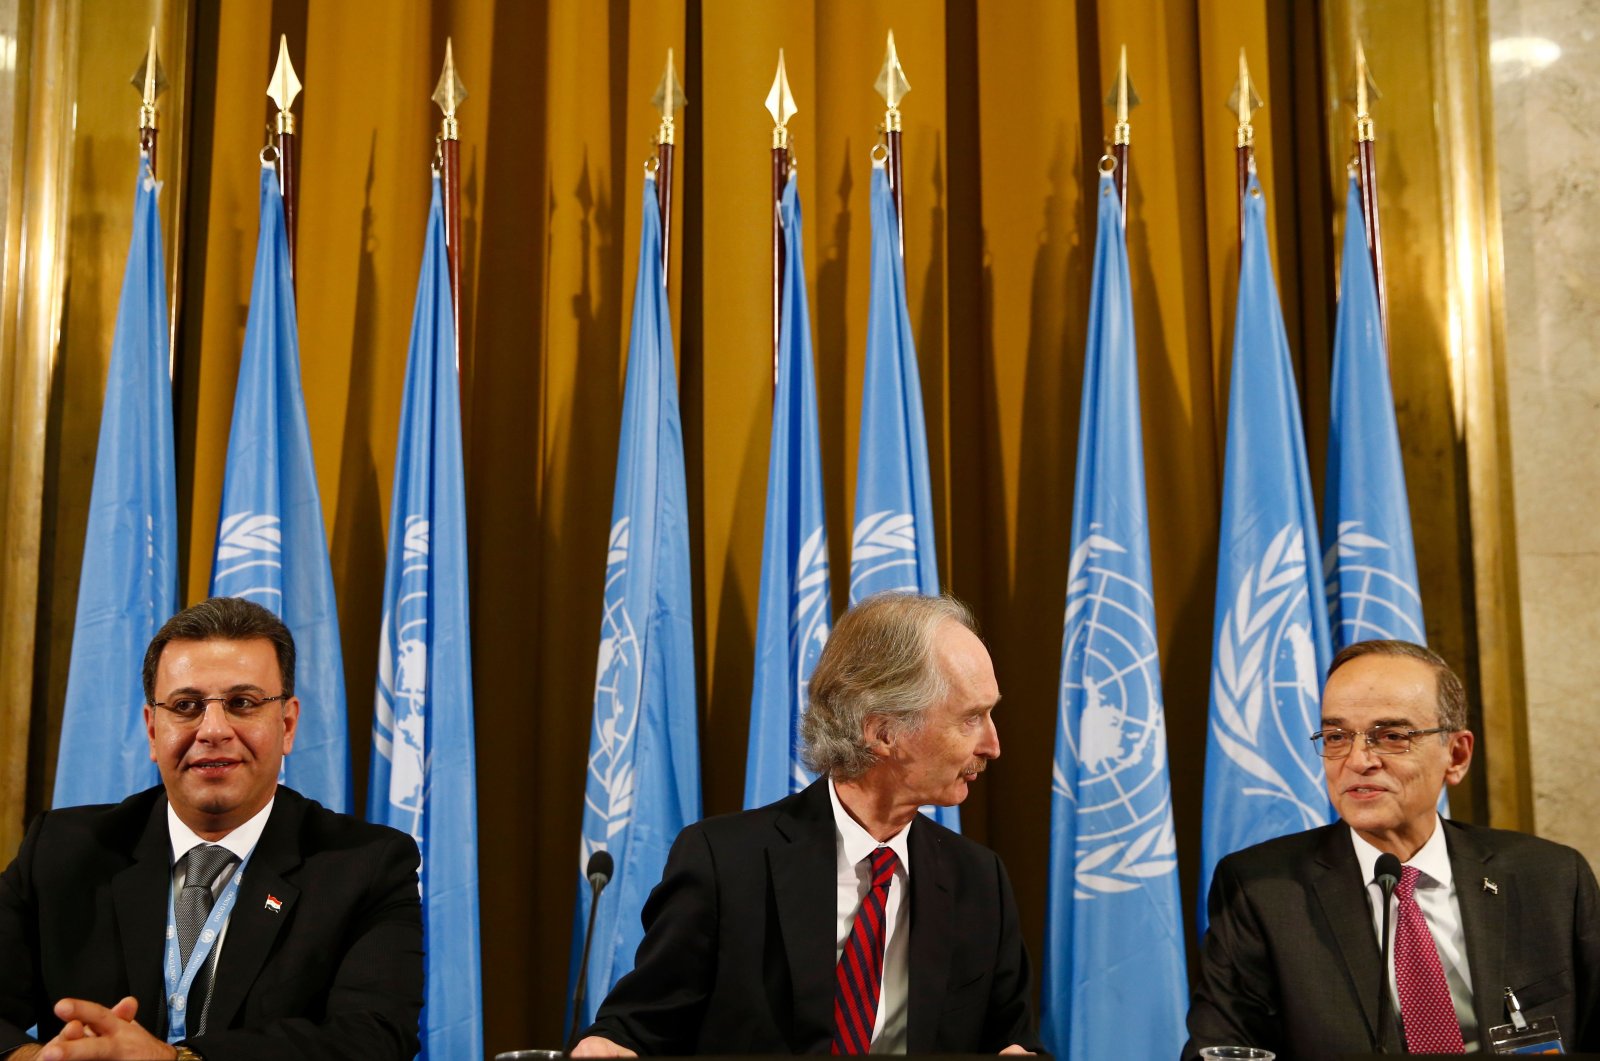 U.N. Special Envoy to Syria Geir Pedersen (C), co-Chair Syrian MP Ahmad al-Kuzbari (L) and co-Chair of the opposition Syrian Negotiations Commission Hadi al-Bahra attend a ceremony to mark the opening of a meeting of the Syria constitution-writing committee at the United Nations Offices in Geneva, Switzerland, Oct. 30, 2019. (AFP Photo)